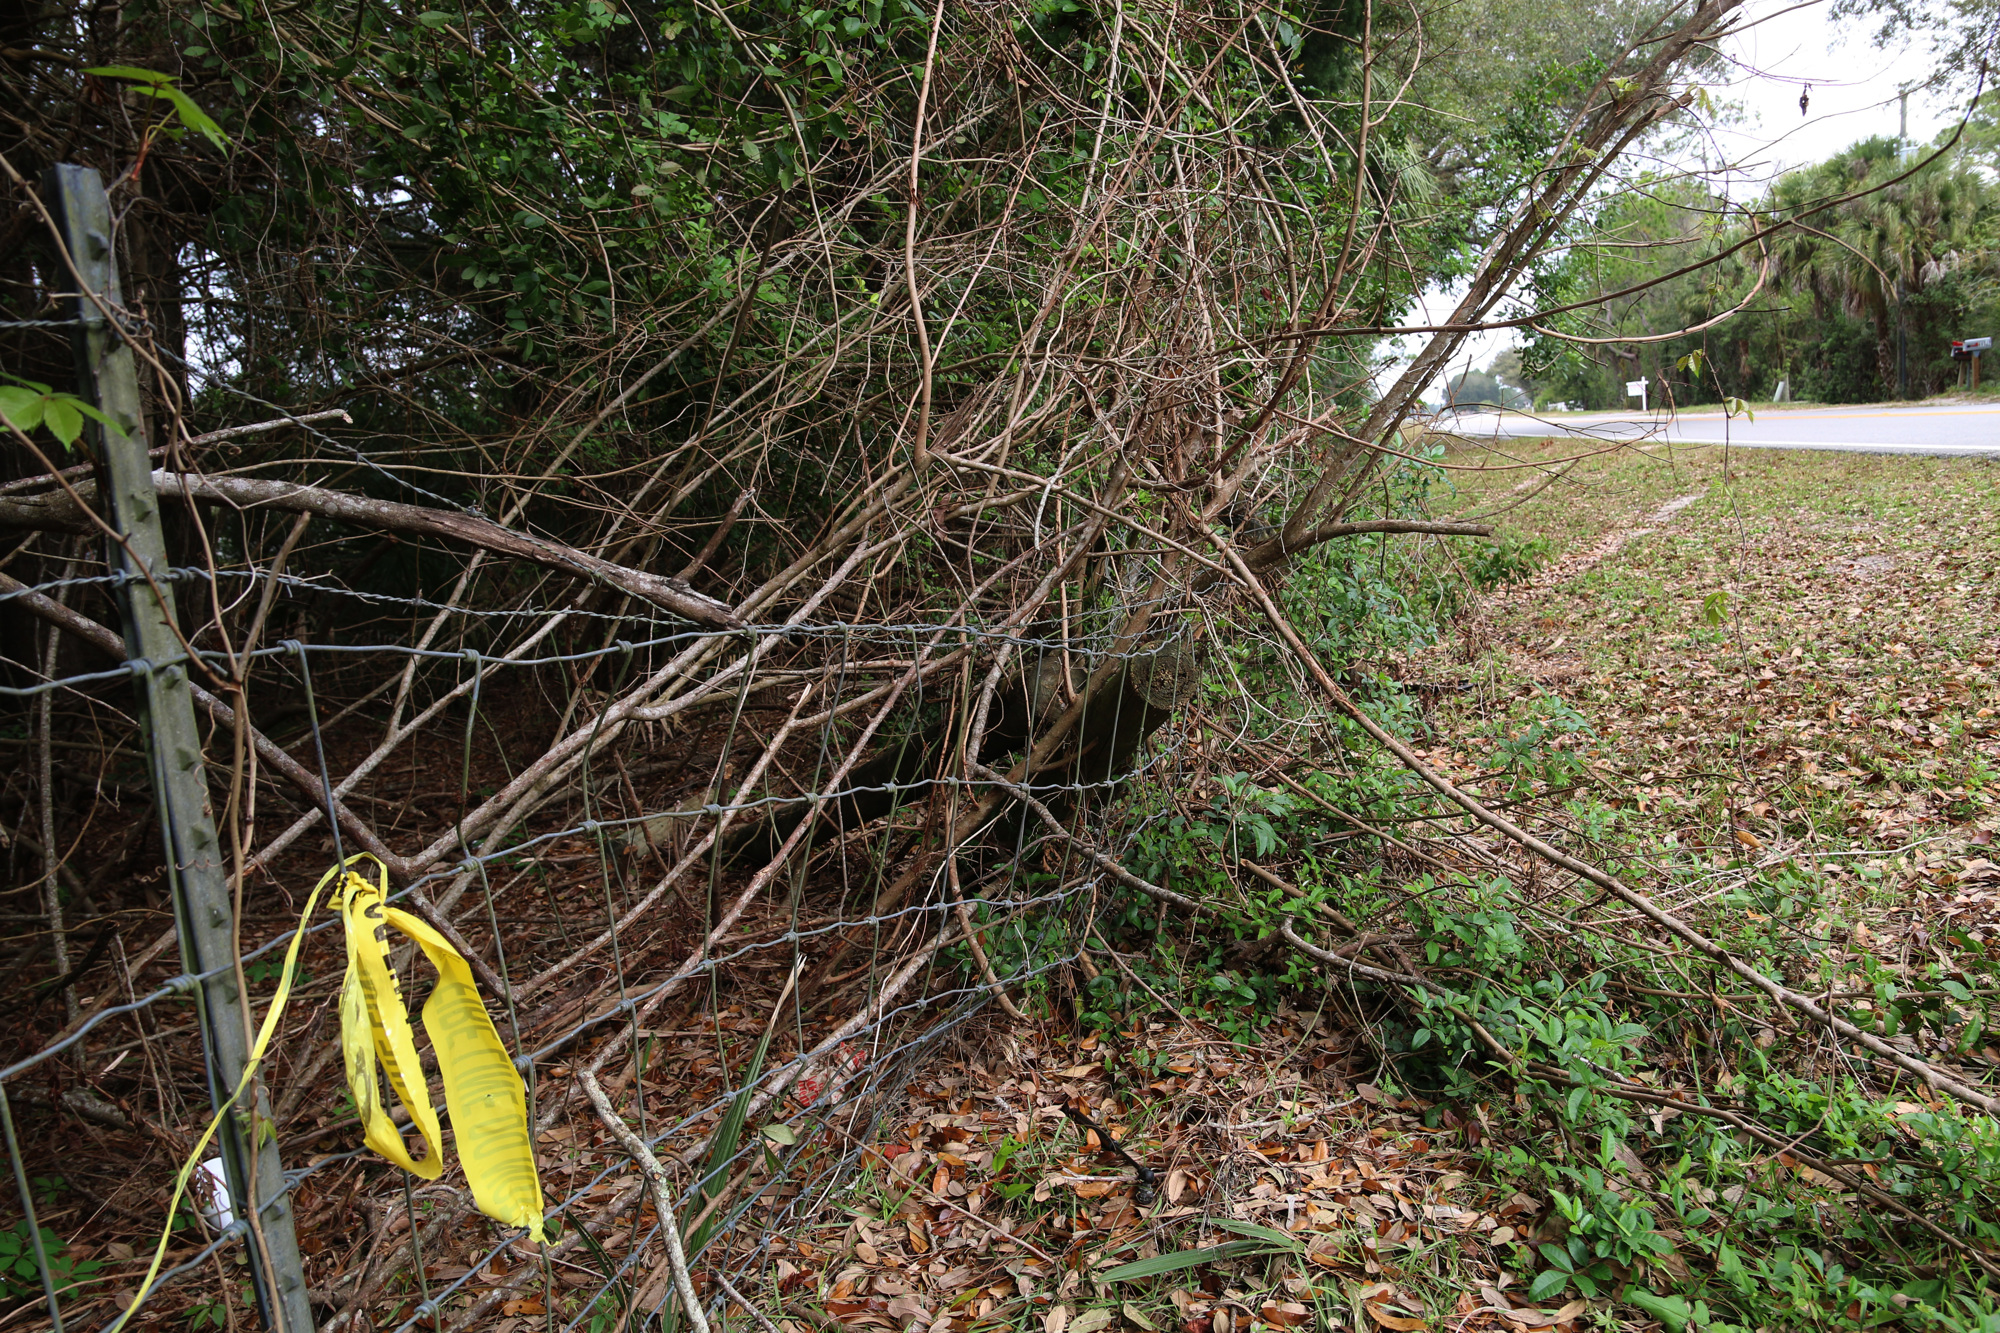 A piece of yellow caution tape remains at the site of the December crash. Photo by Jarleene Almenas